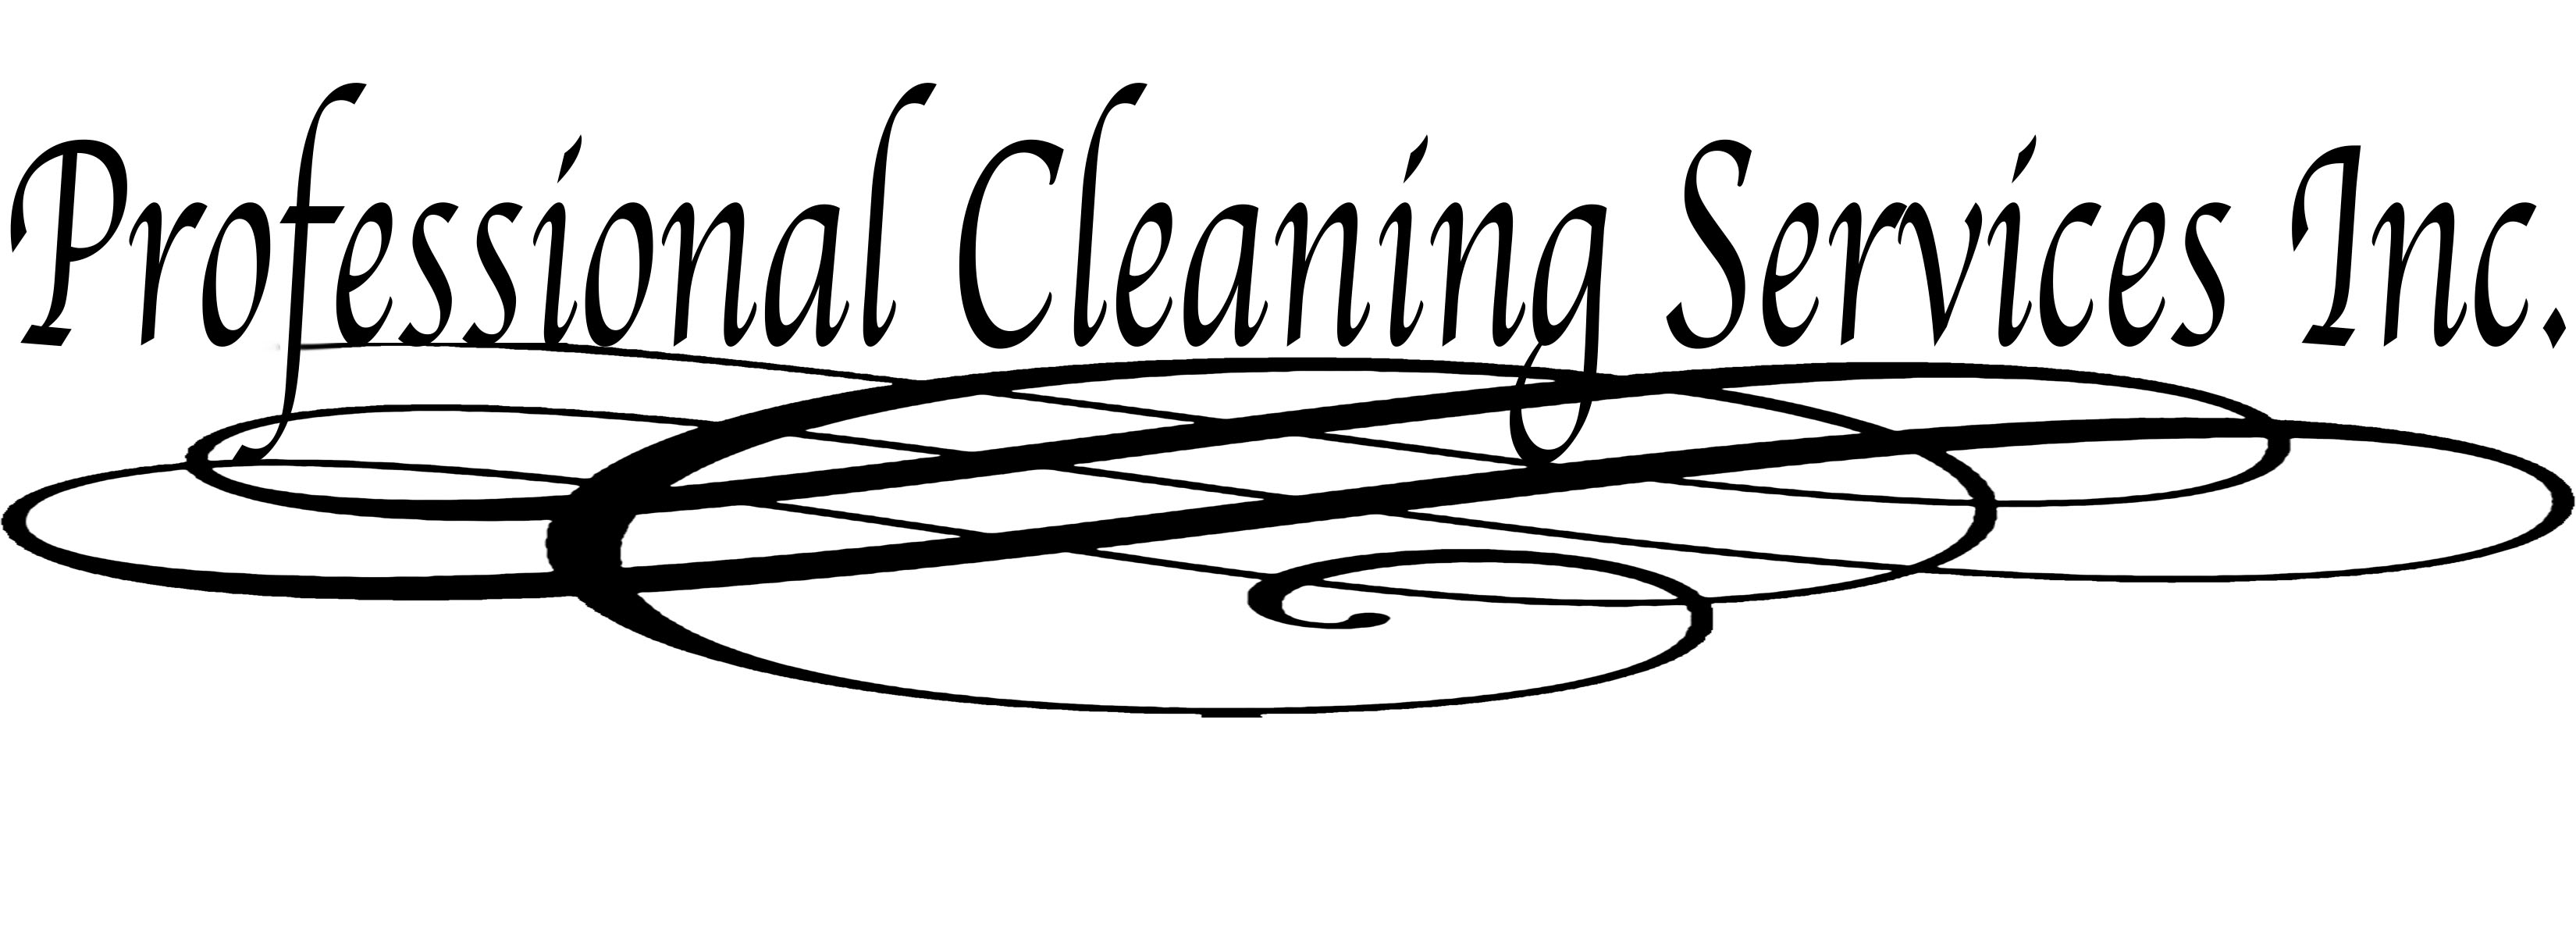 Professional Cleaning Services, Inc. Logo